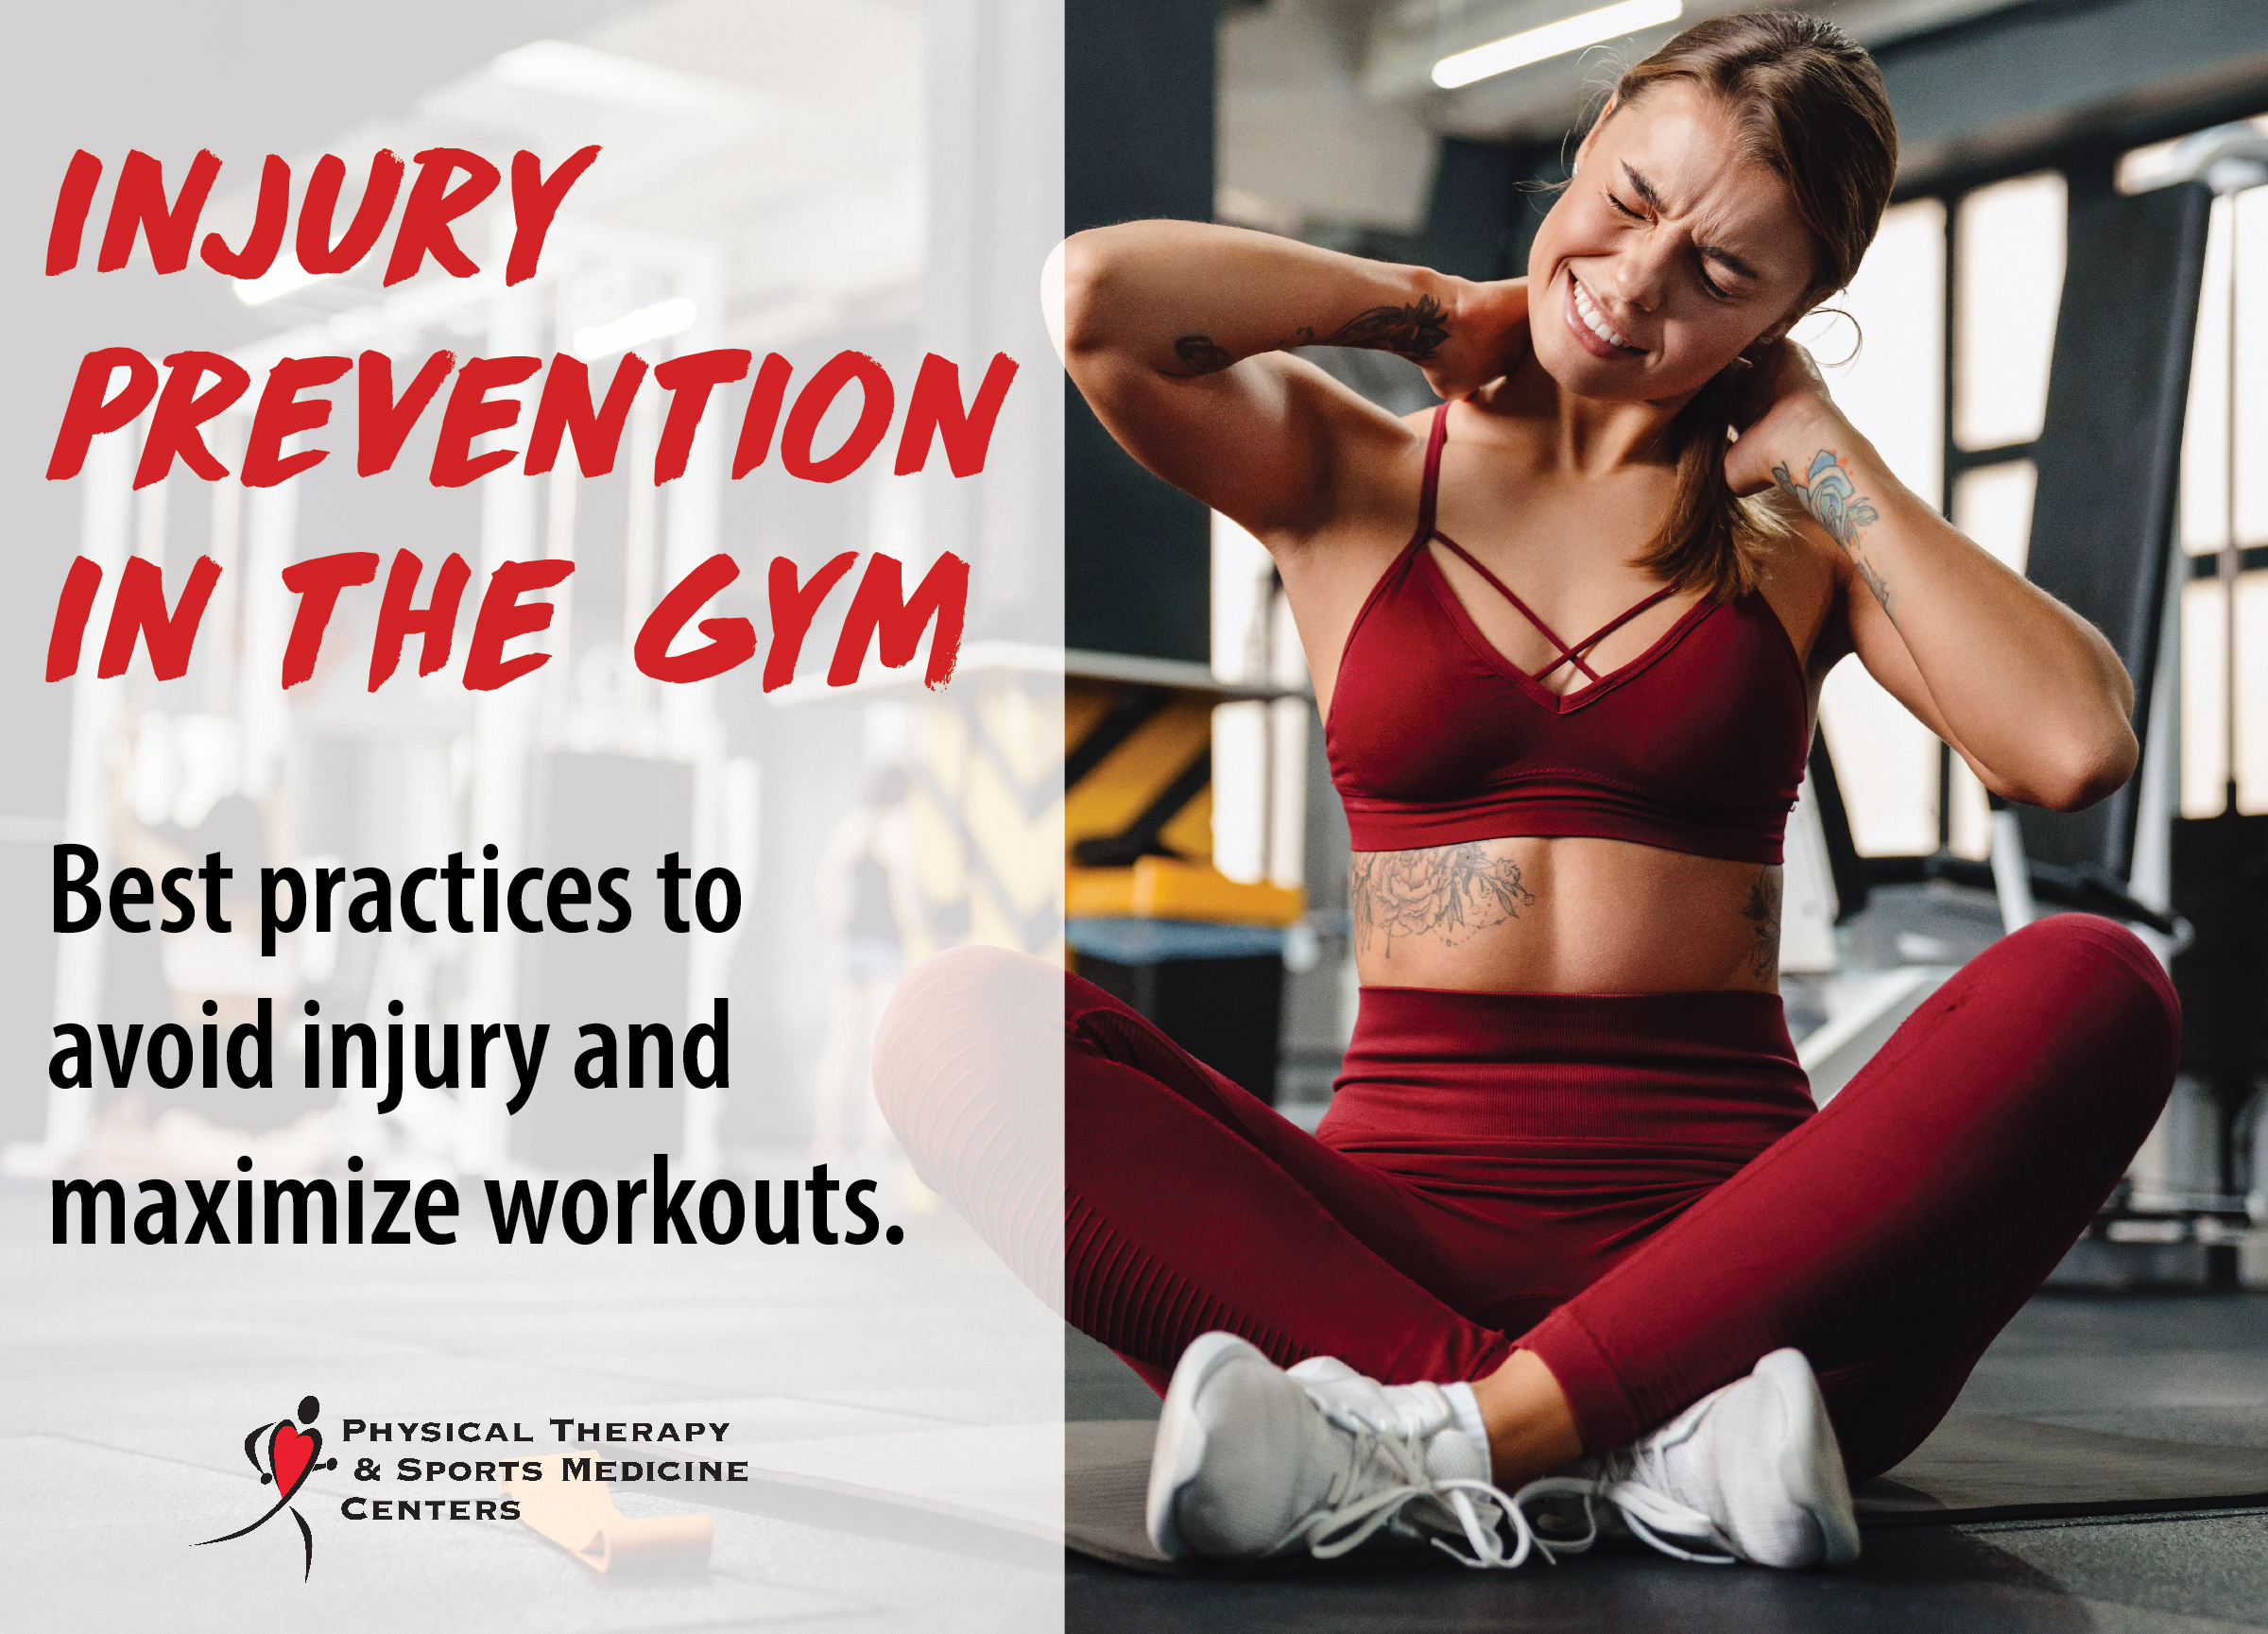 Injury prevention in the gym